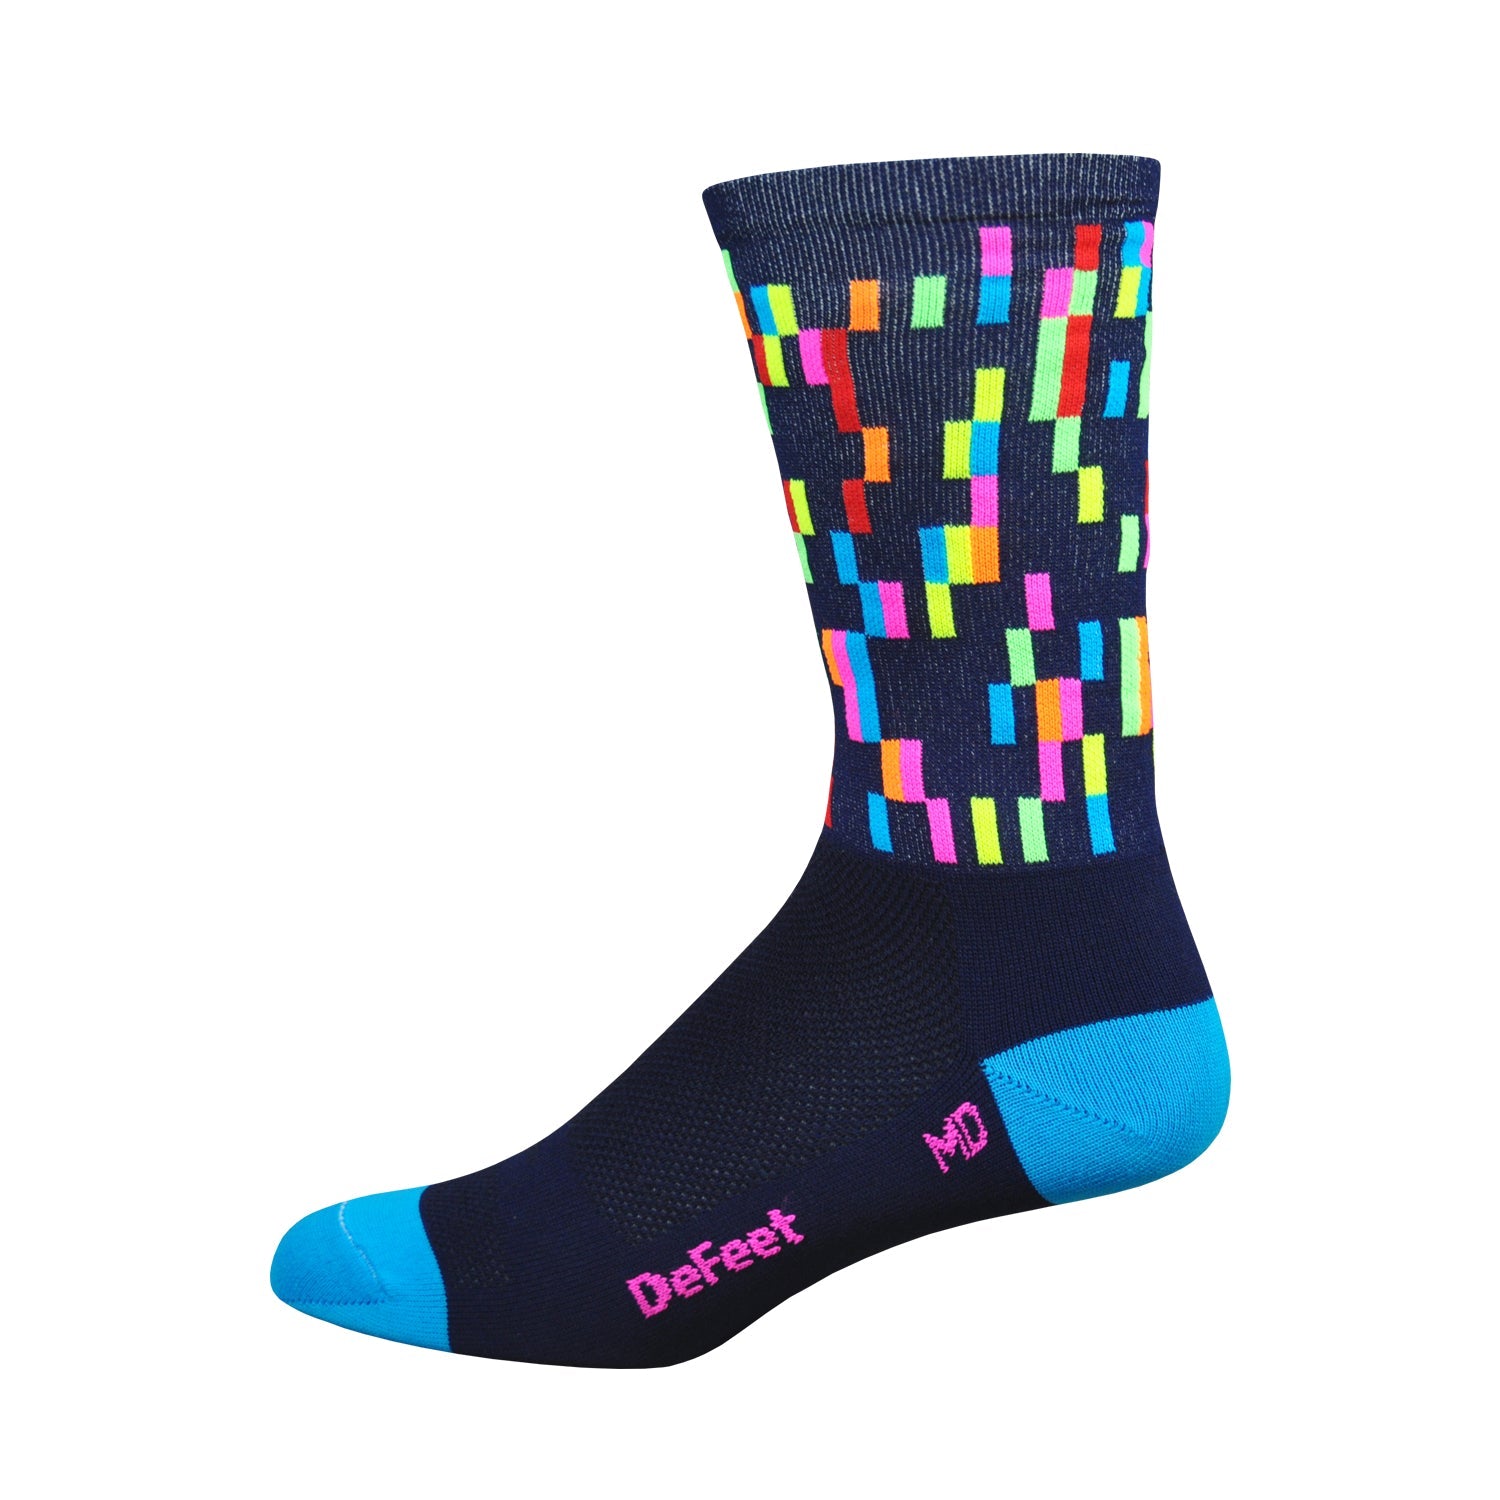 Aireator cycling sock in navy with brightly colored pixel squares around the cuff